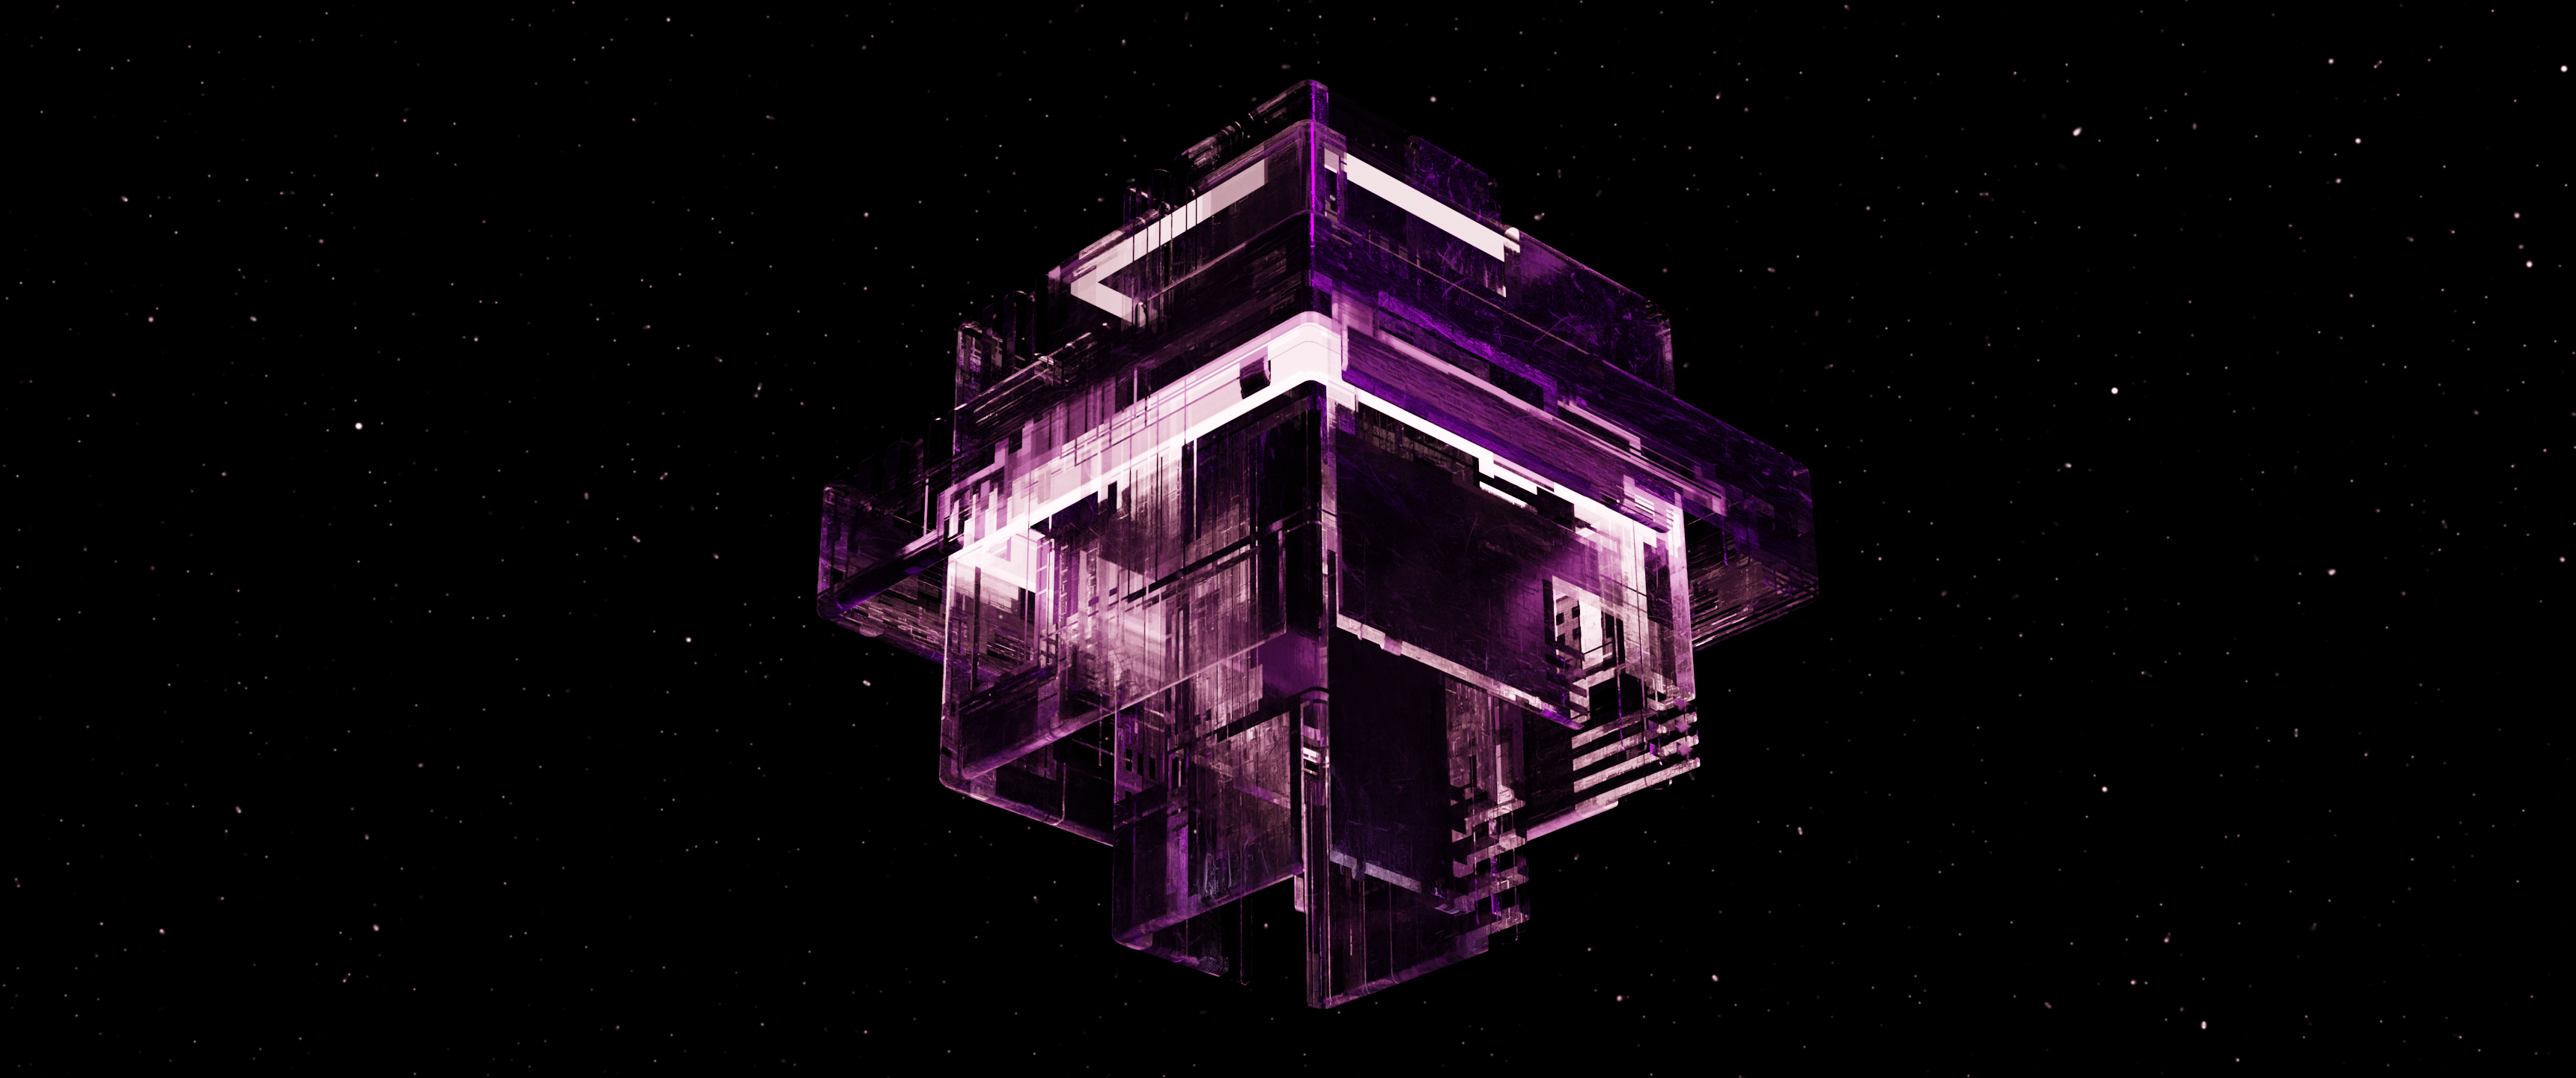 A purple and black cube - 3440x1440